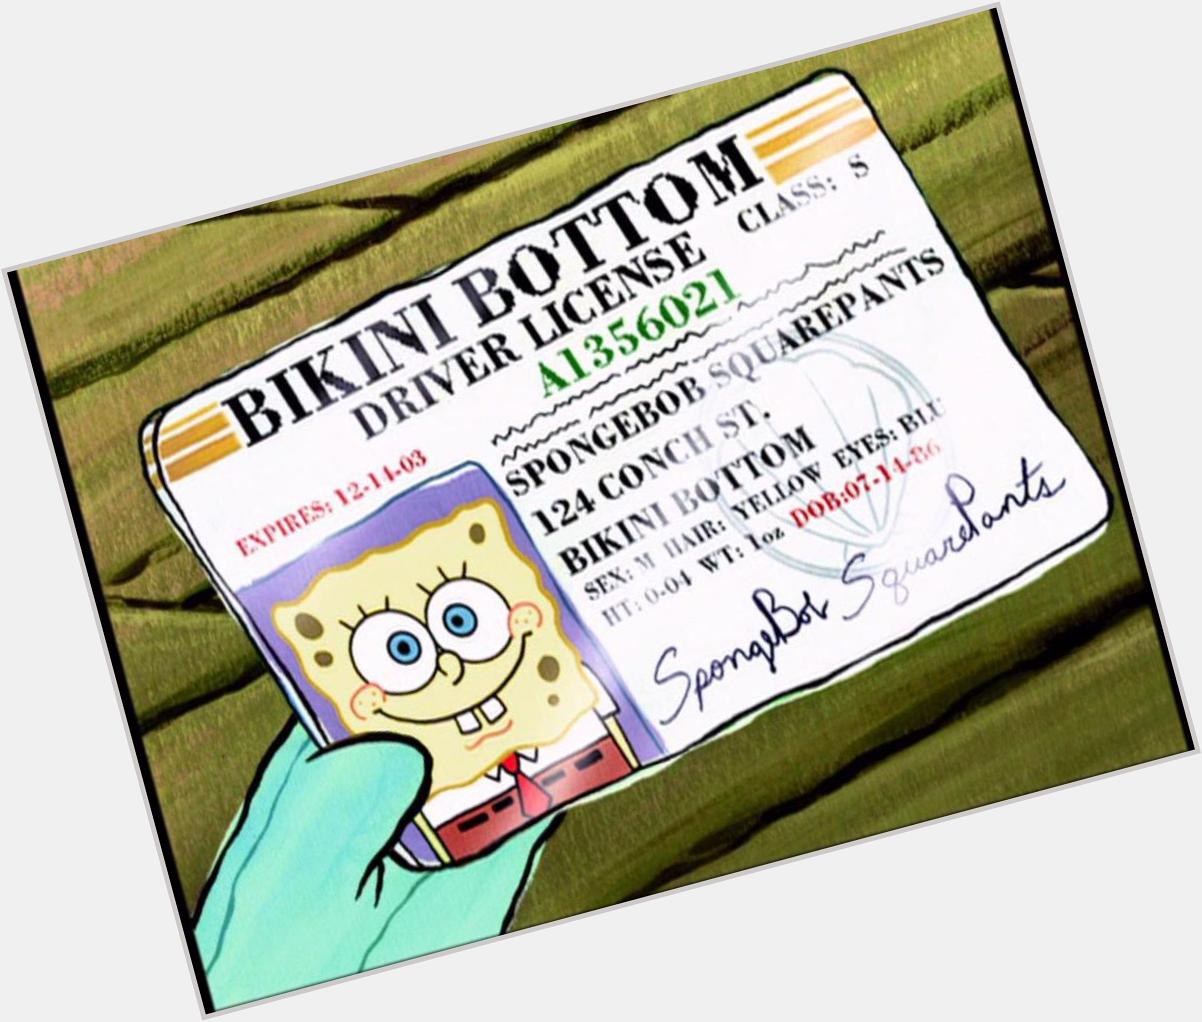 Happy Birthday to the one and only SpongeBob SquarePants!!! 